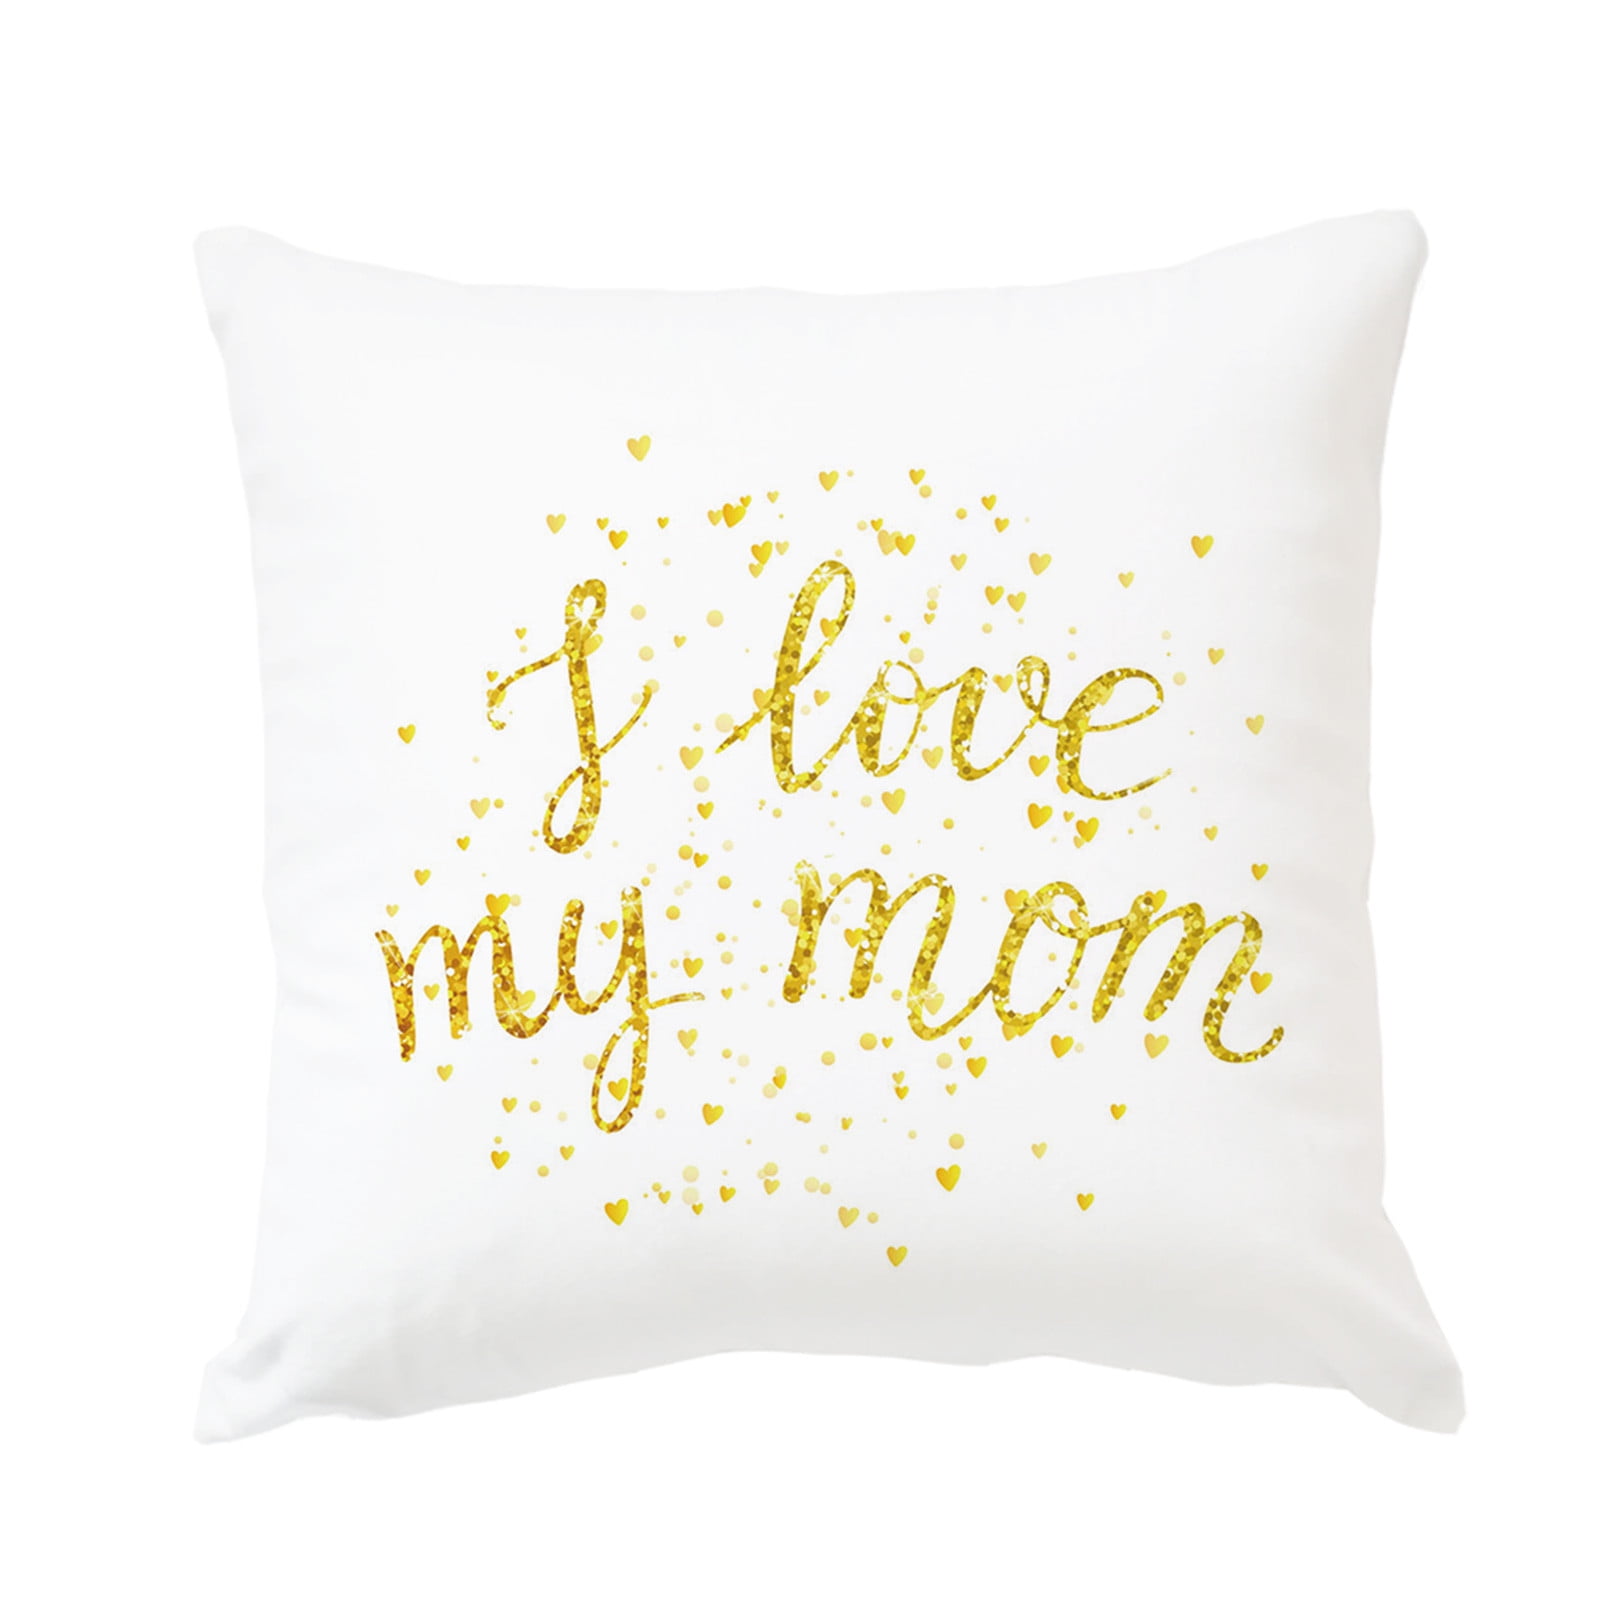 Pillow Cases,Outdoor Pillows,Decorative Pillows For Home Decor and Pillow Covers Gifts For Mom